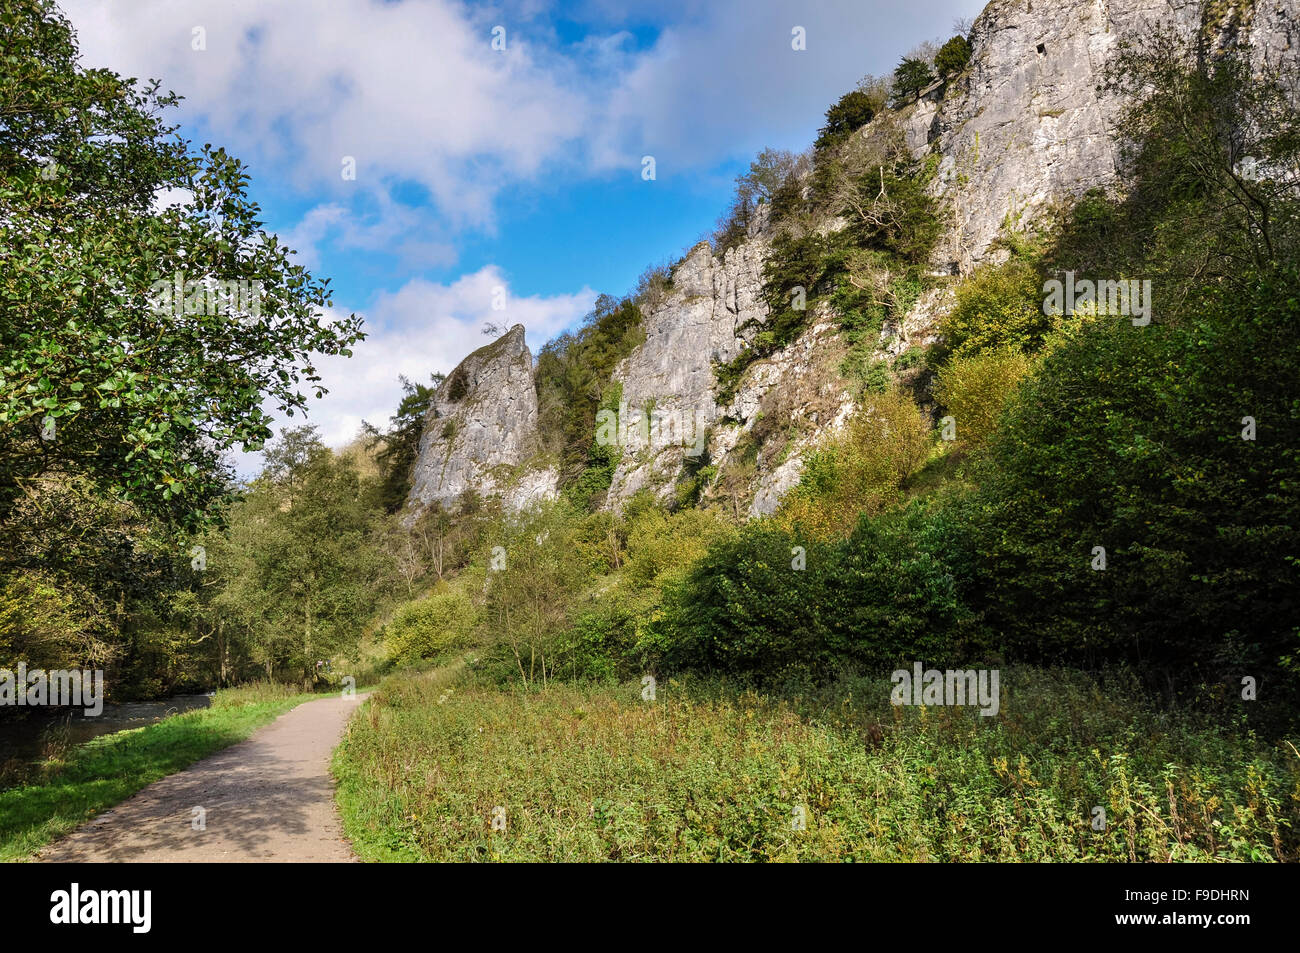 Limestone cliffs in Dove Dale, a scenic area of the Peak District national park, Derbyshire, England. Stock Photo